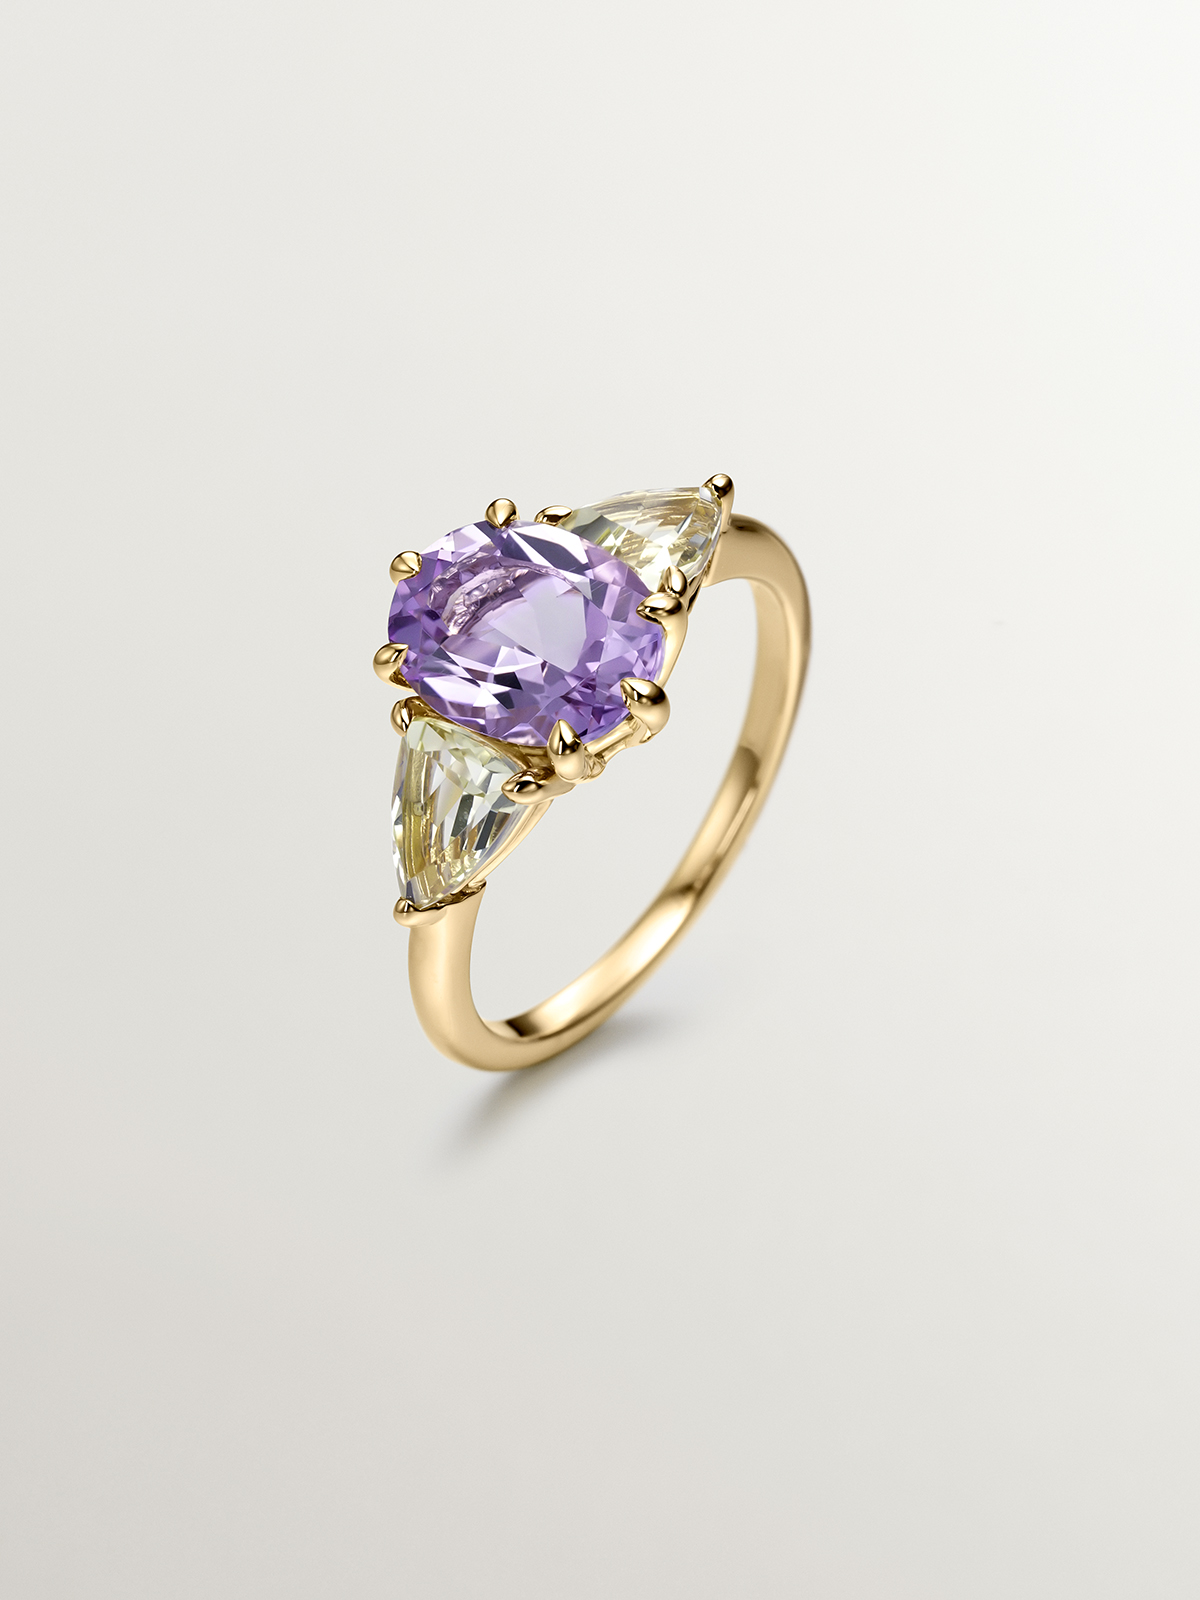 925 Silver trio ring bathed in 18K yellow gold with purple amethyst and yellow quartz.